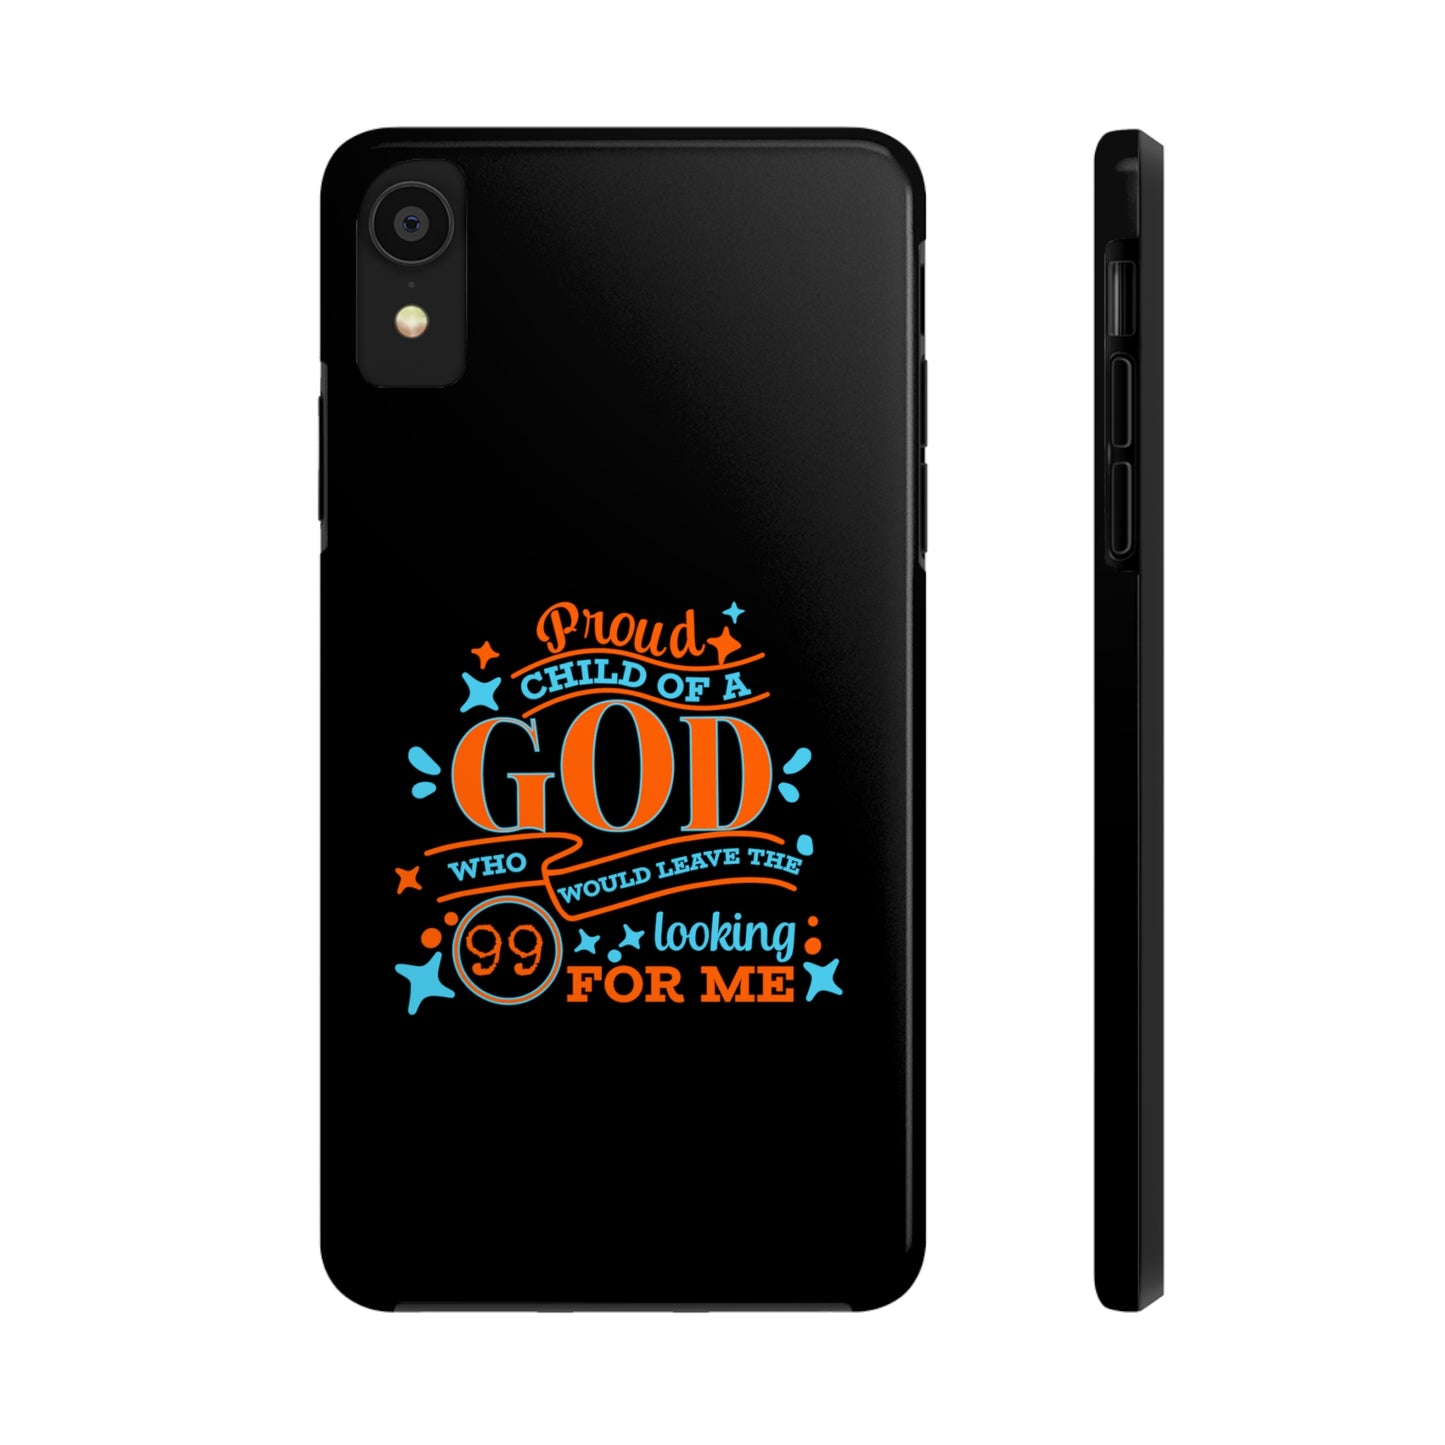 Proud Child Of A God Who Would Leave The 99 Looking For Me Tough Phone Cases, Case-Mate